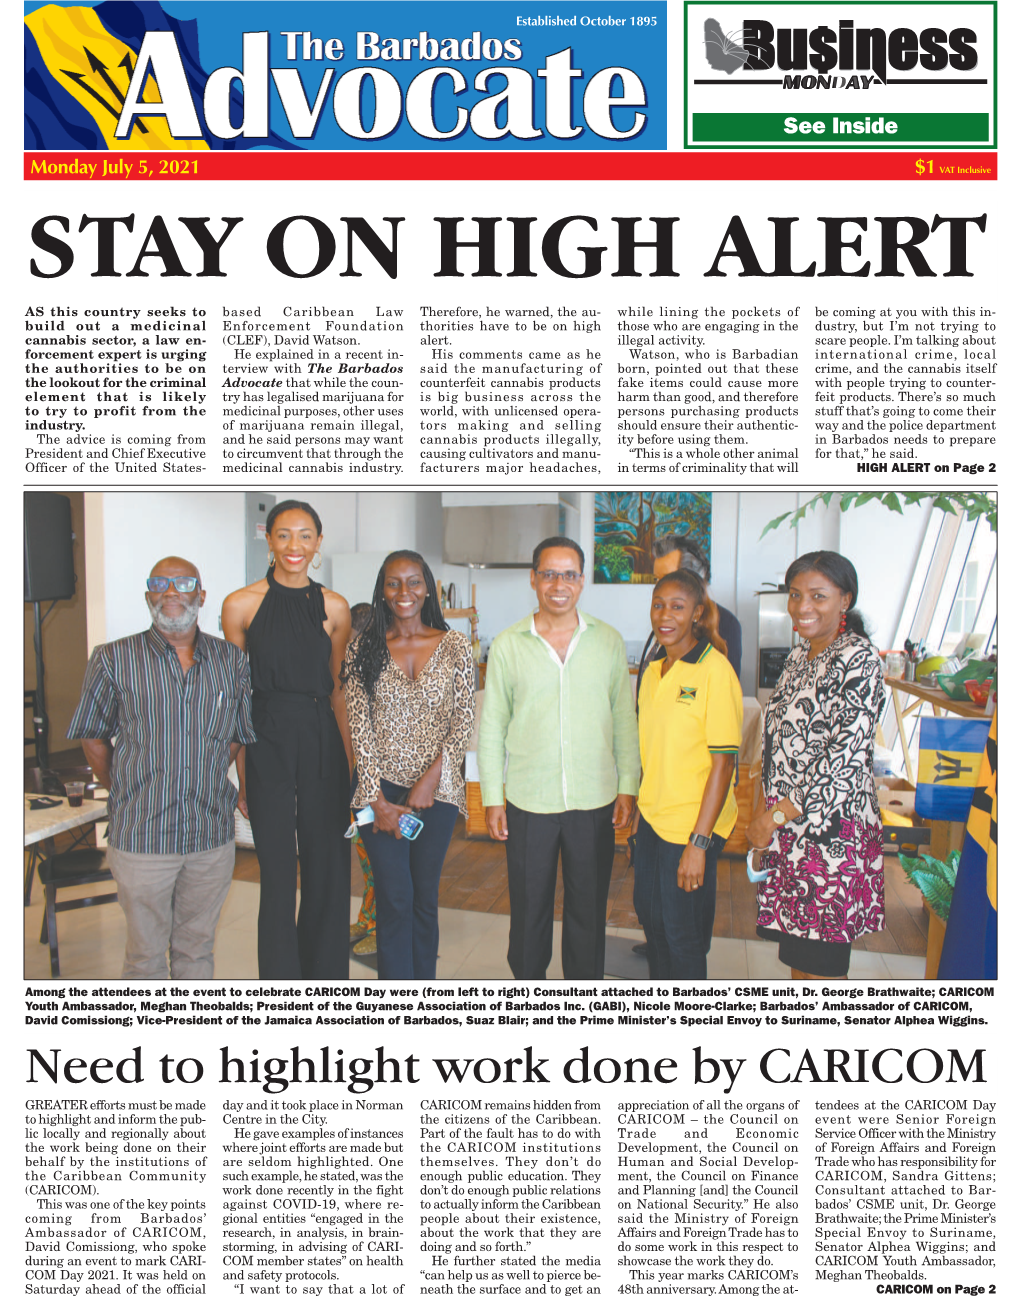 Need to Highlight Work Done by CARICOM